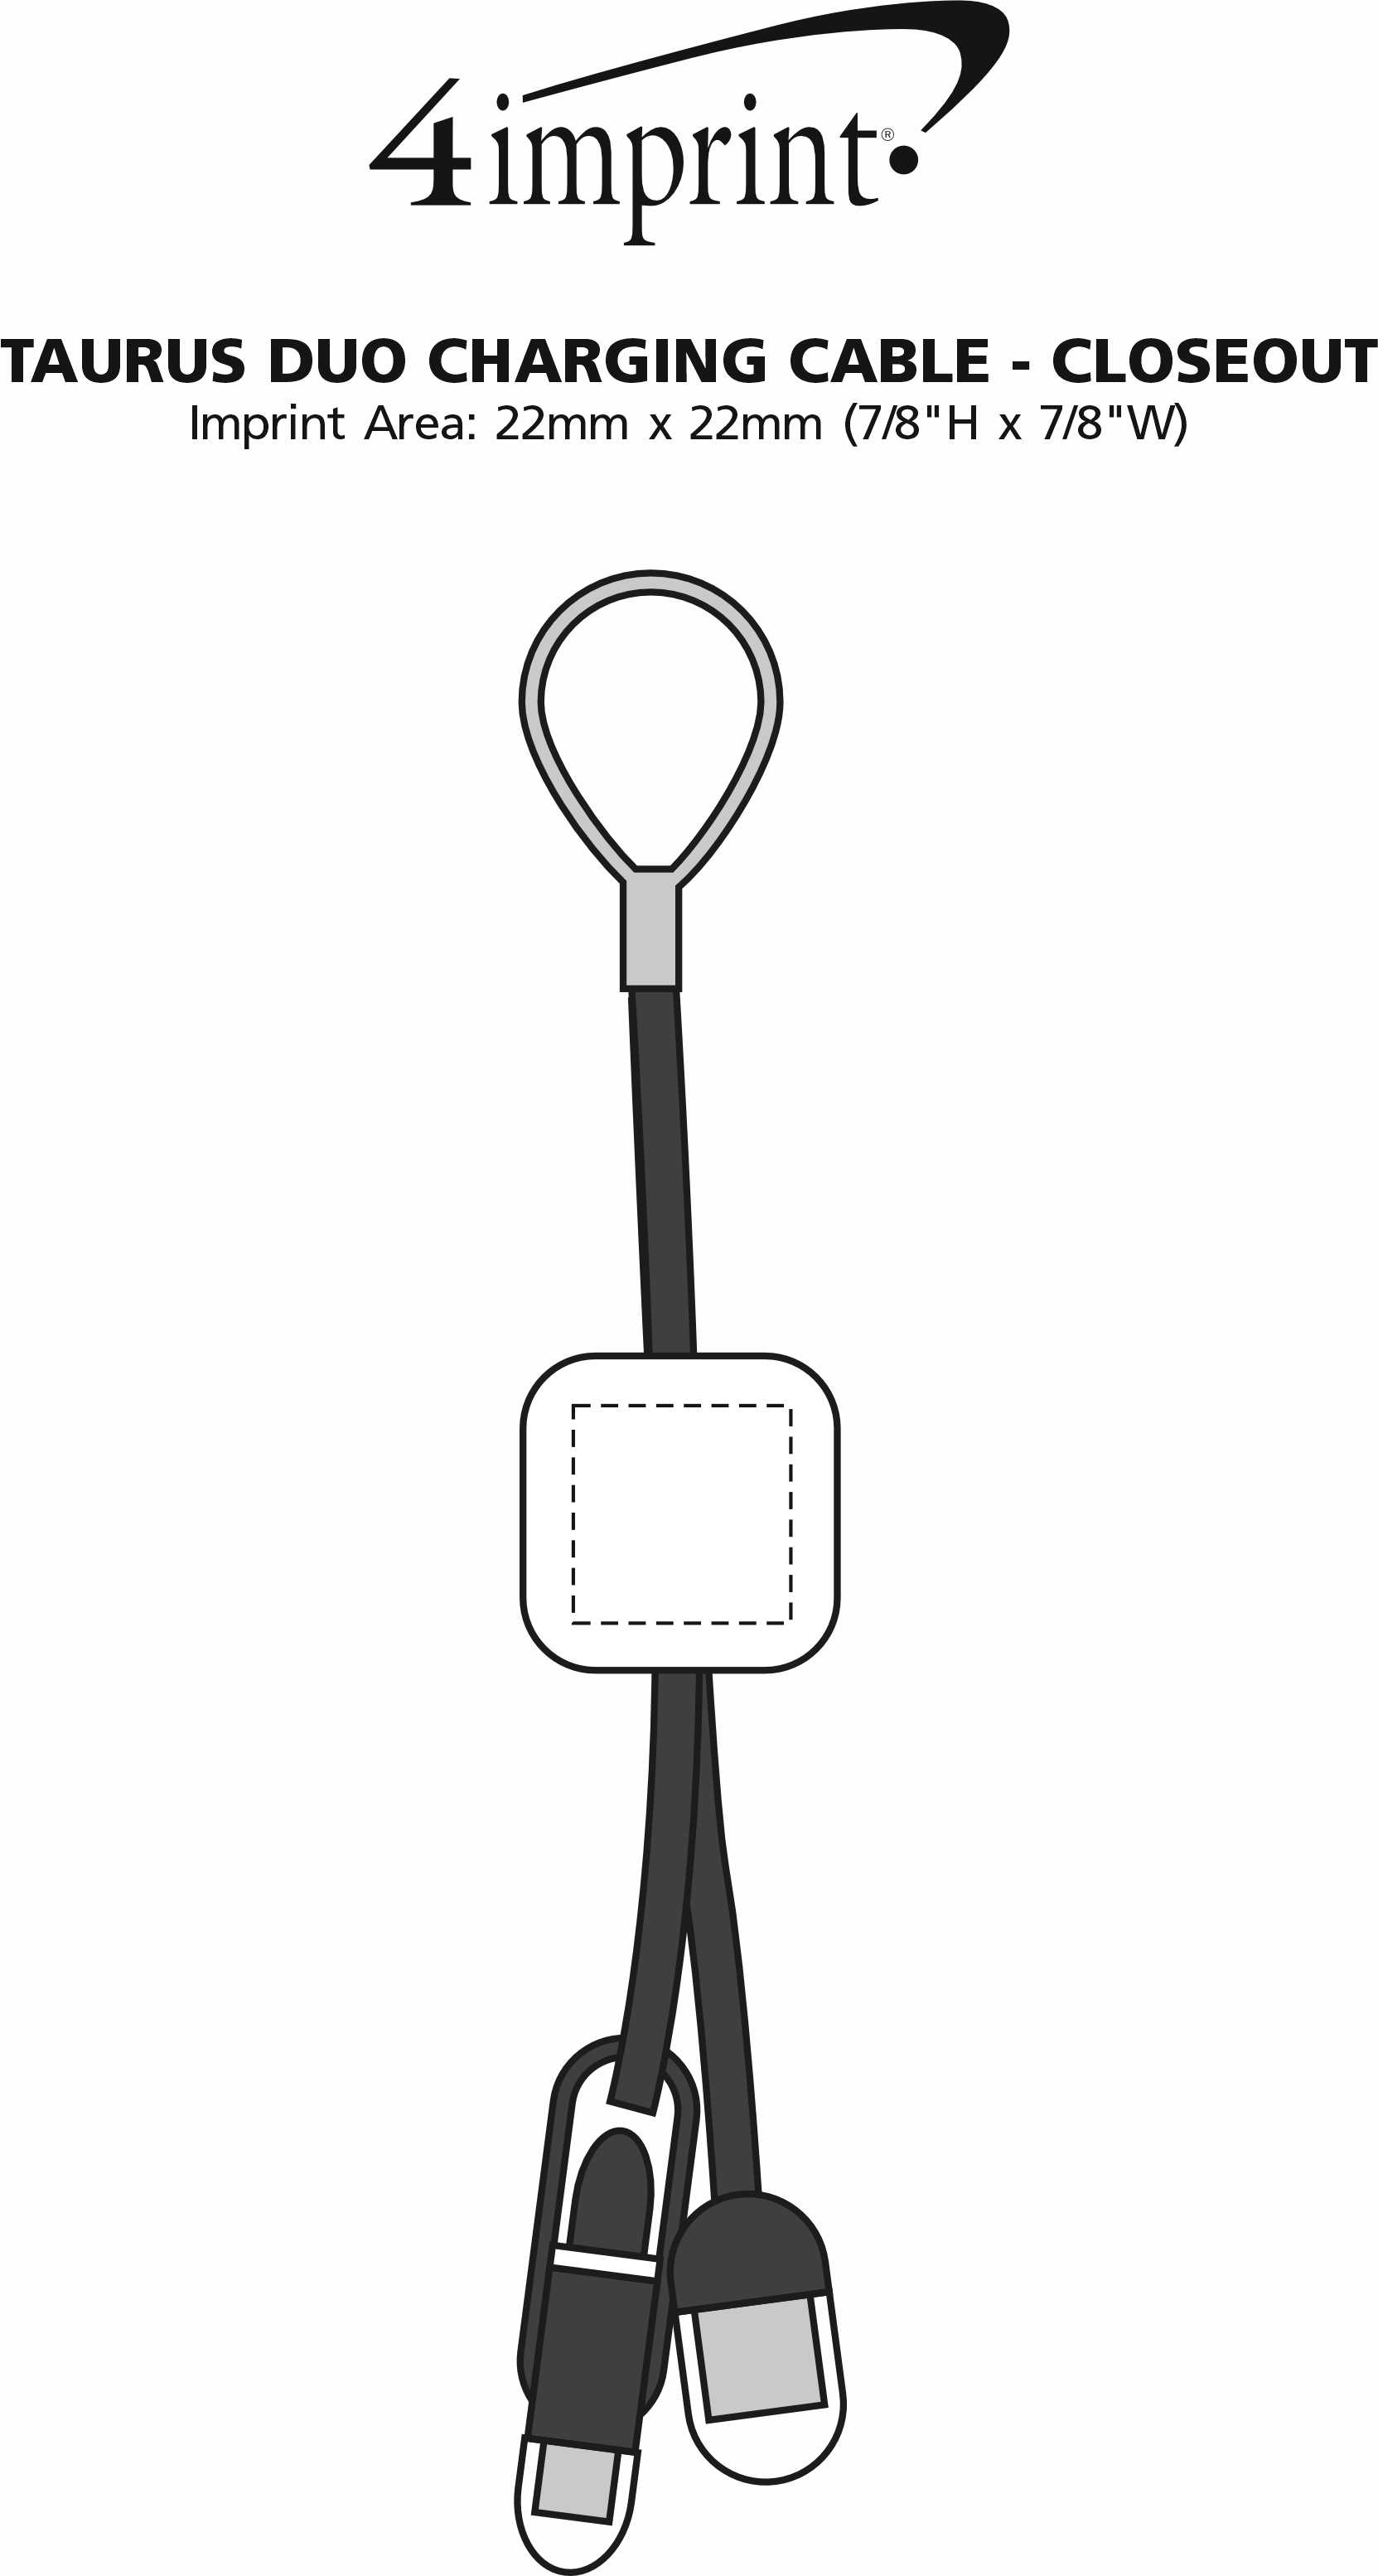 Imprint Area of Taurus Duo Charging Cable - Closeout